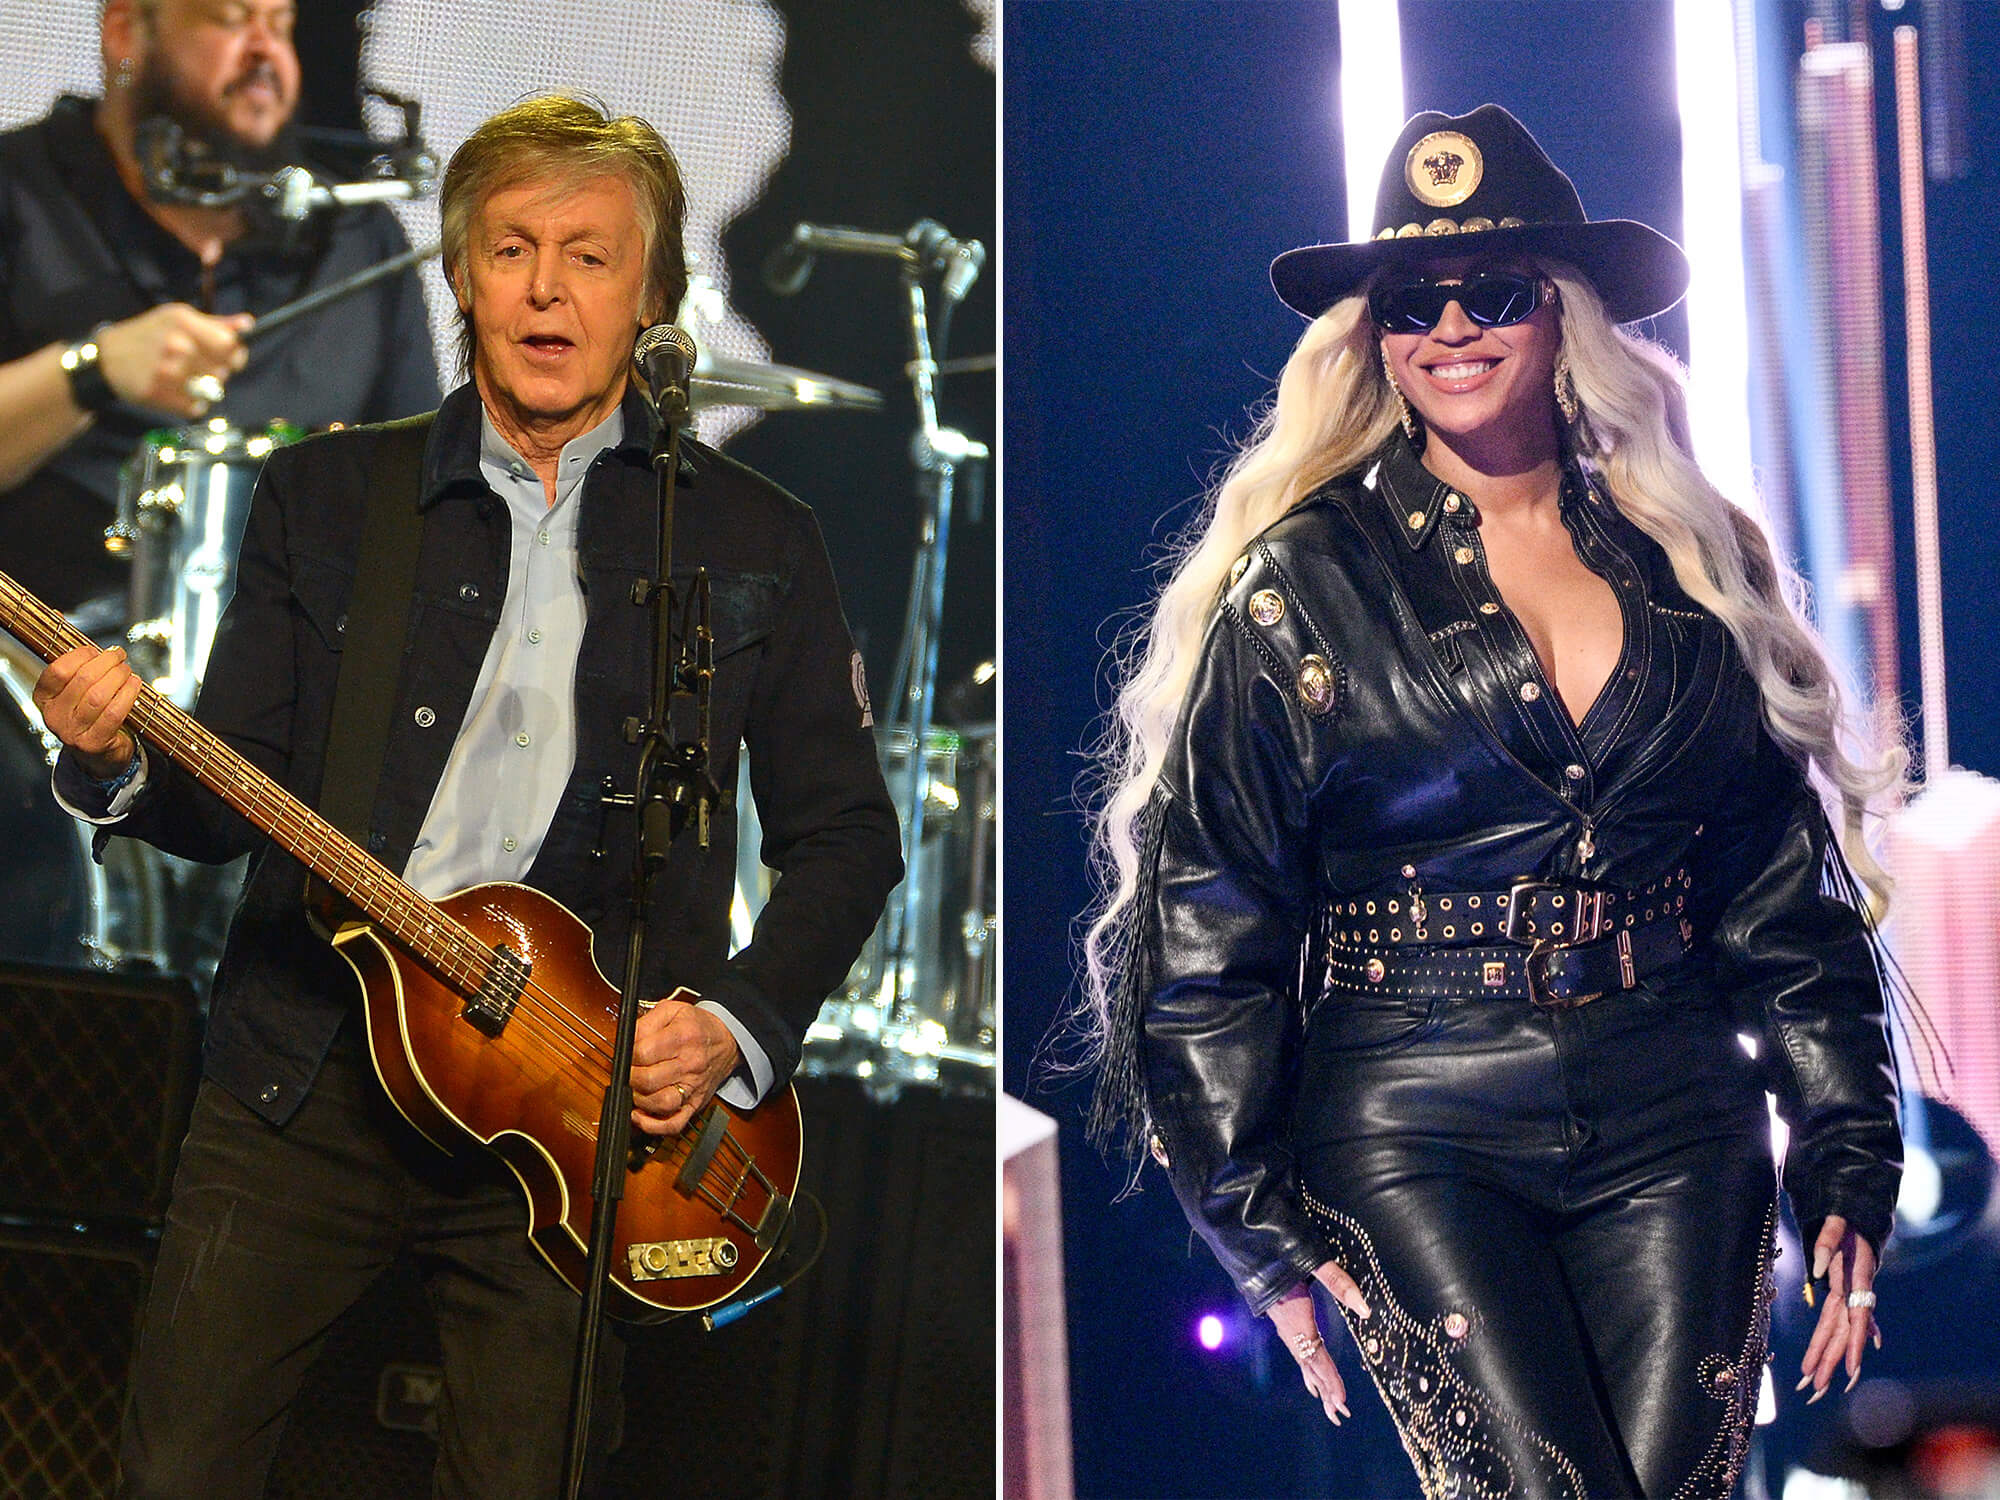 Paul McCartney (left) playing bass. Beyonce (right) in cowboy-inspired clothing at an awards show.